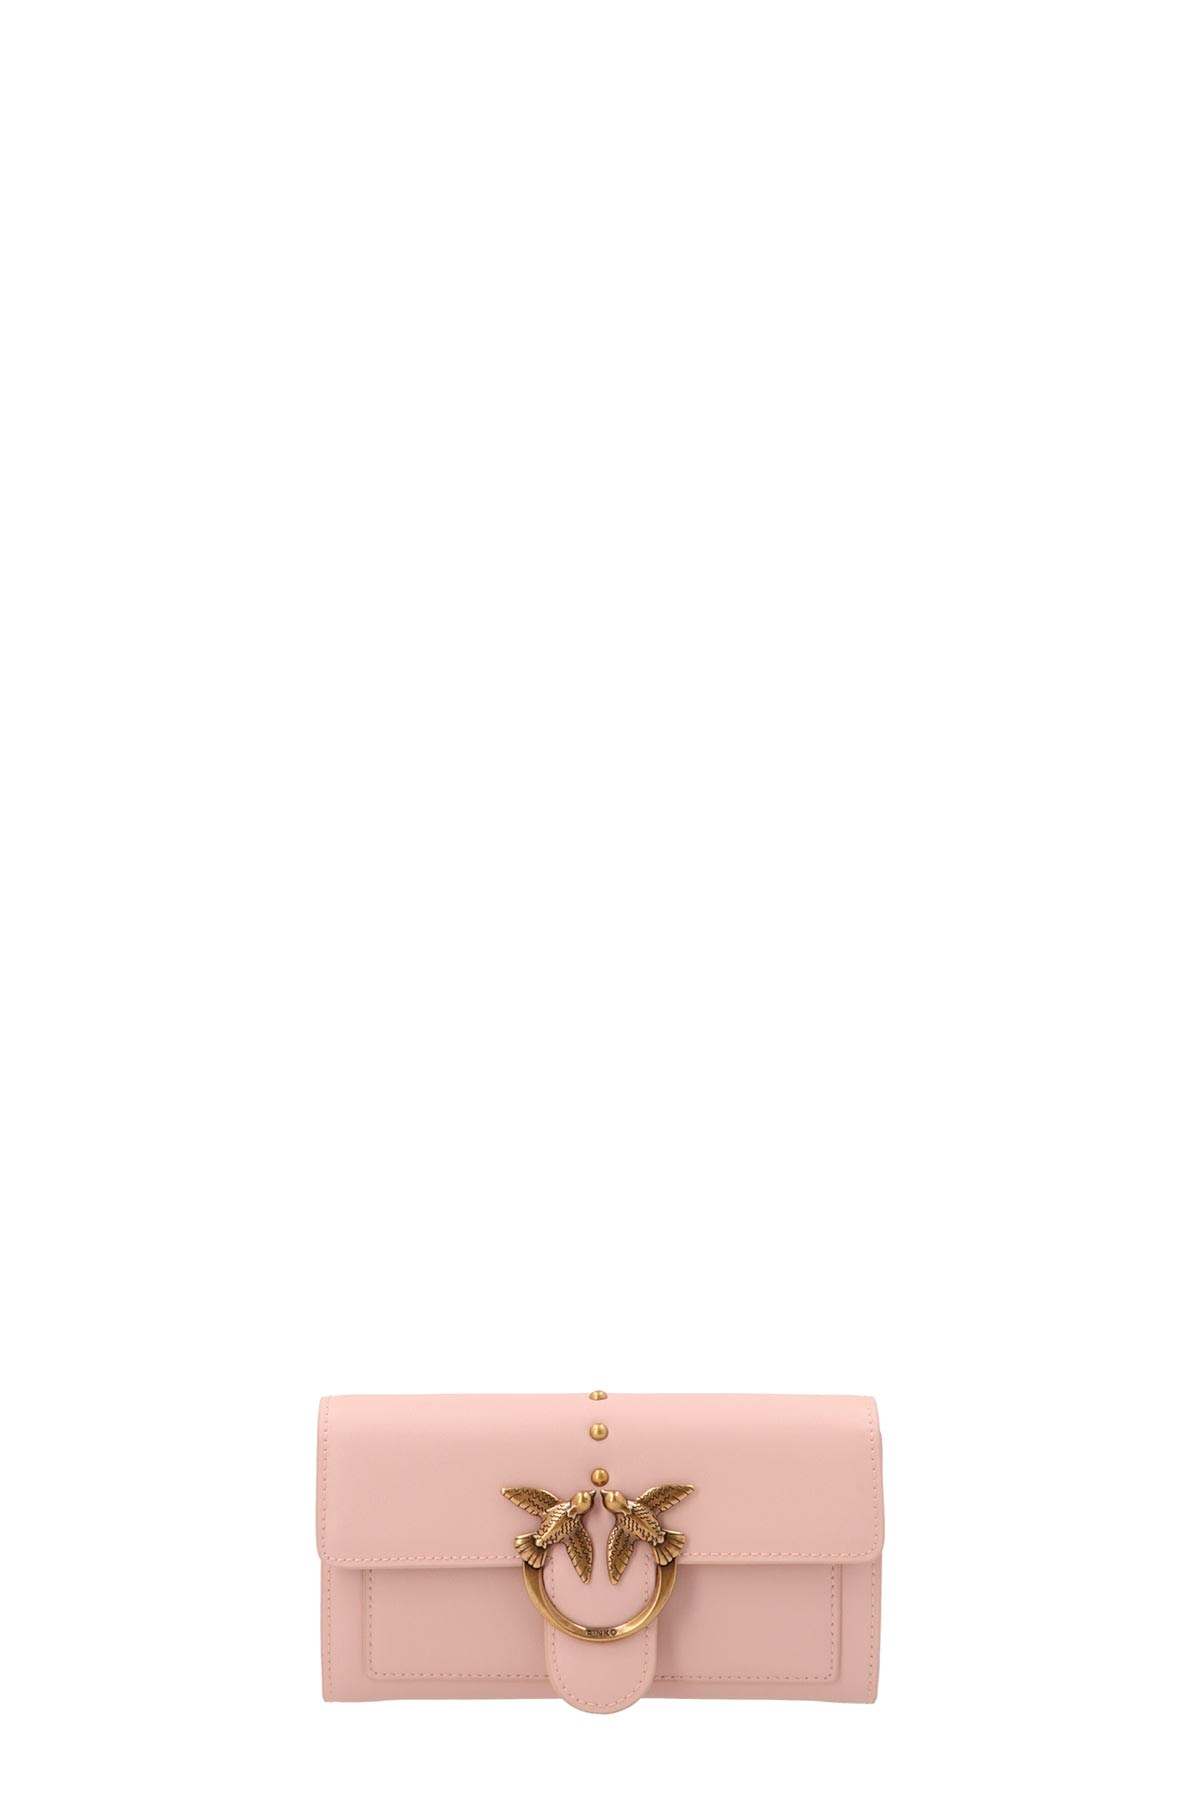 PINKO 'Love Simply’ Wallet